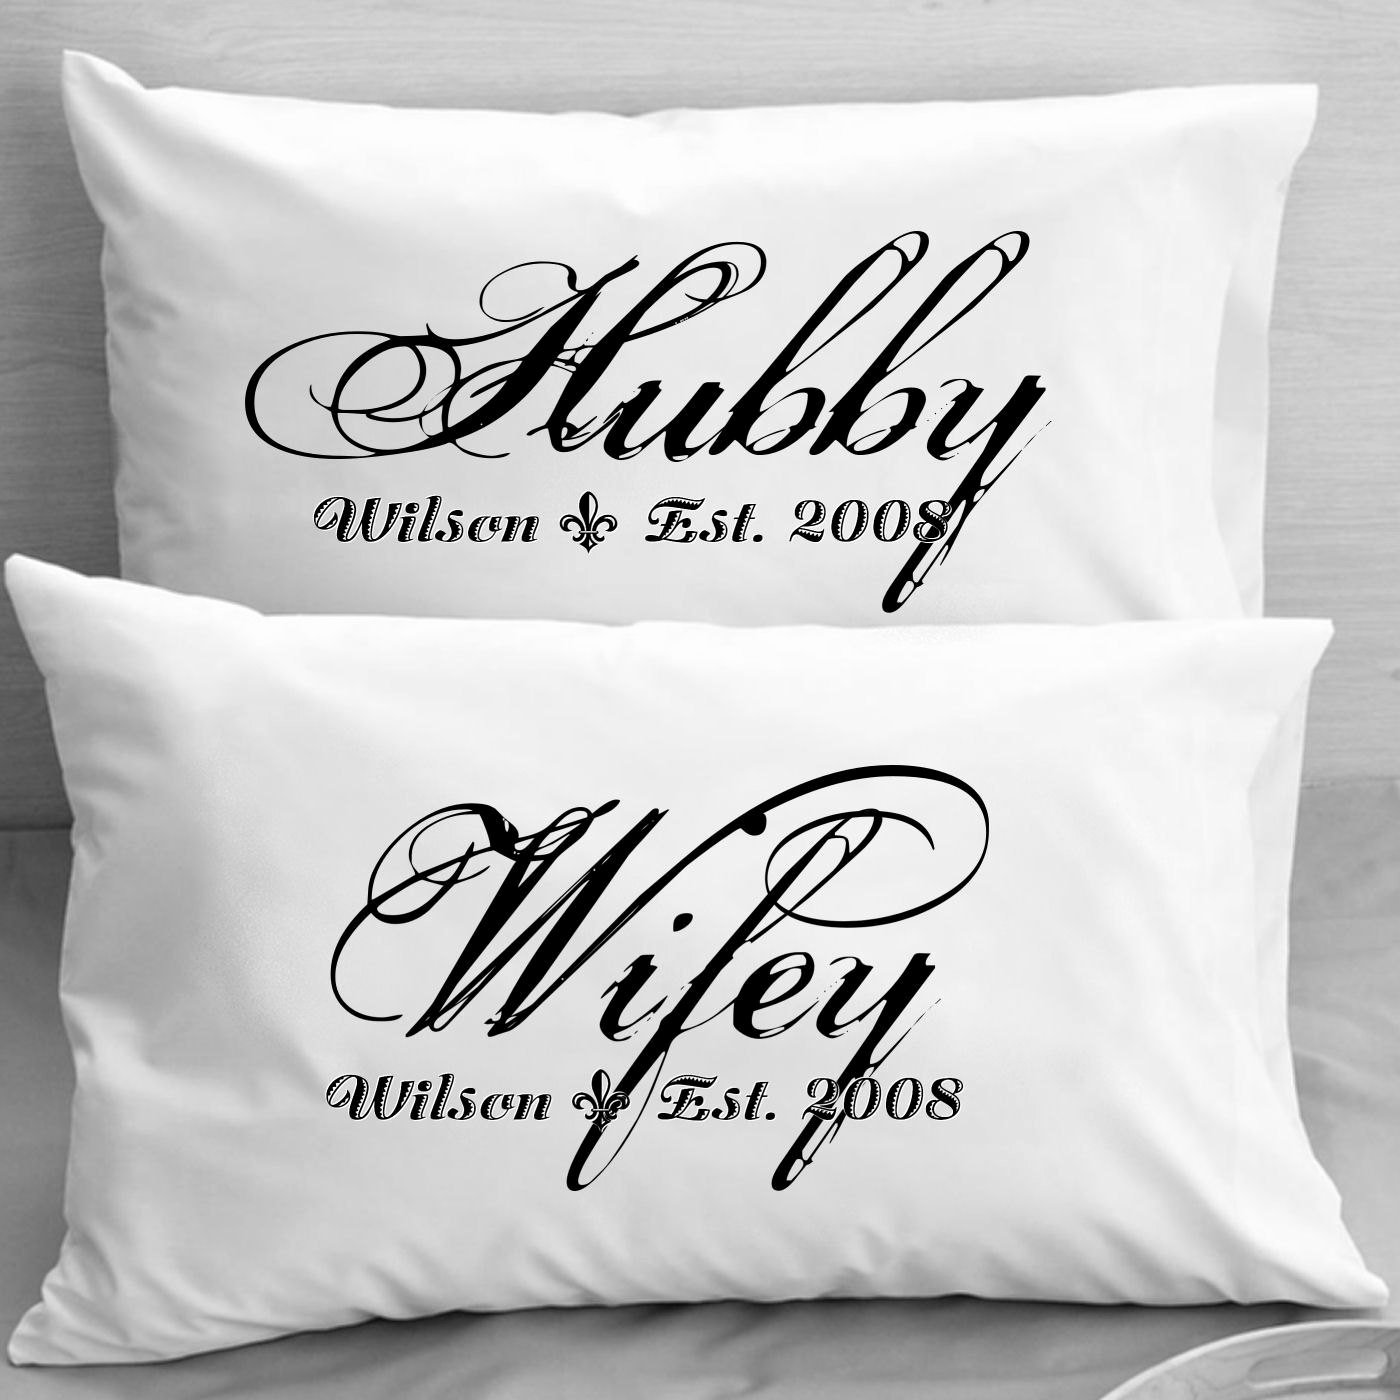 10 Awesome 2Nd Year Anniversary Gift Ideas For Her 2nd wedding anniversary gift ideas for him inspirational couples 1 2022